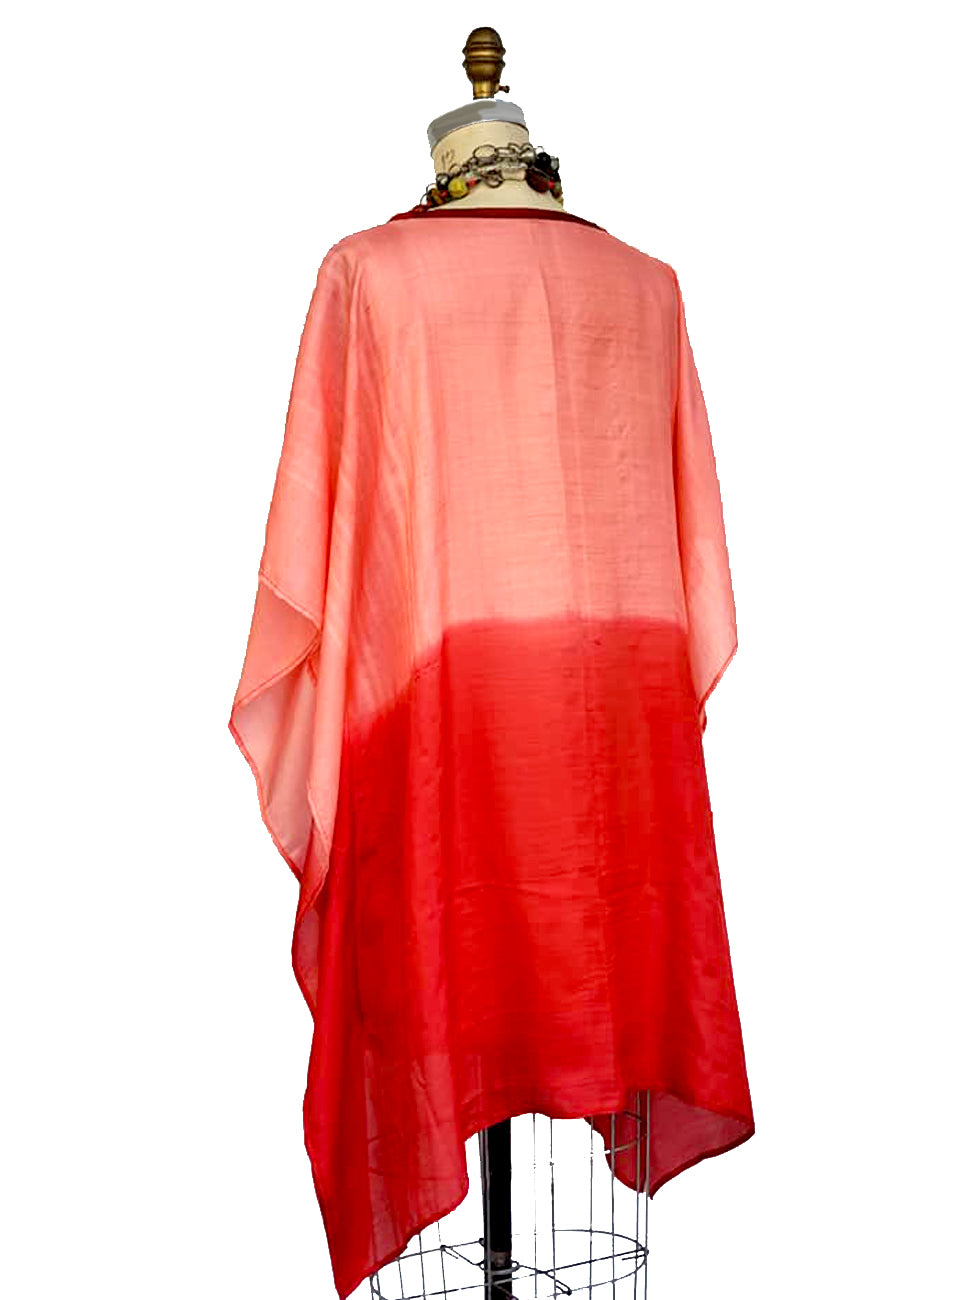 Silk Caftan Almost Famous Collection - Rothko